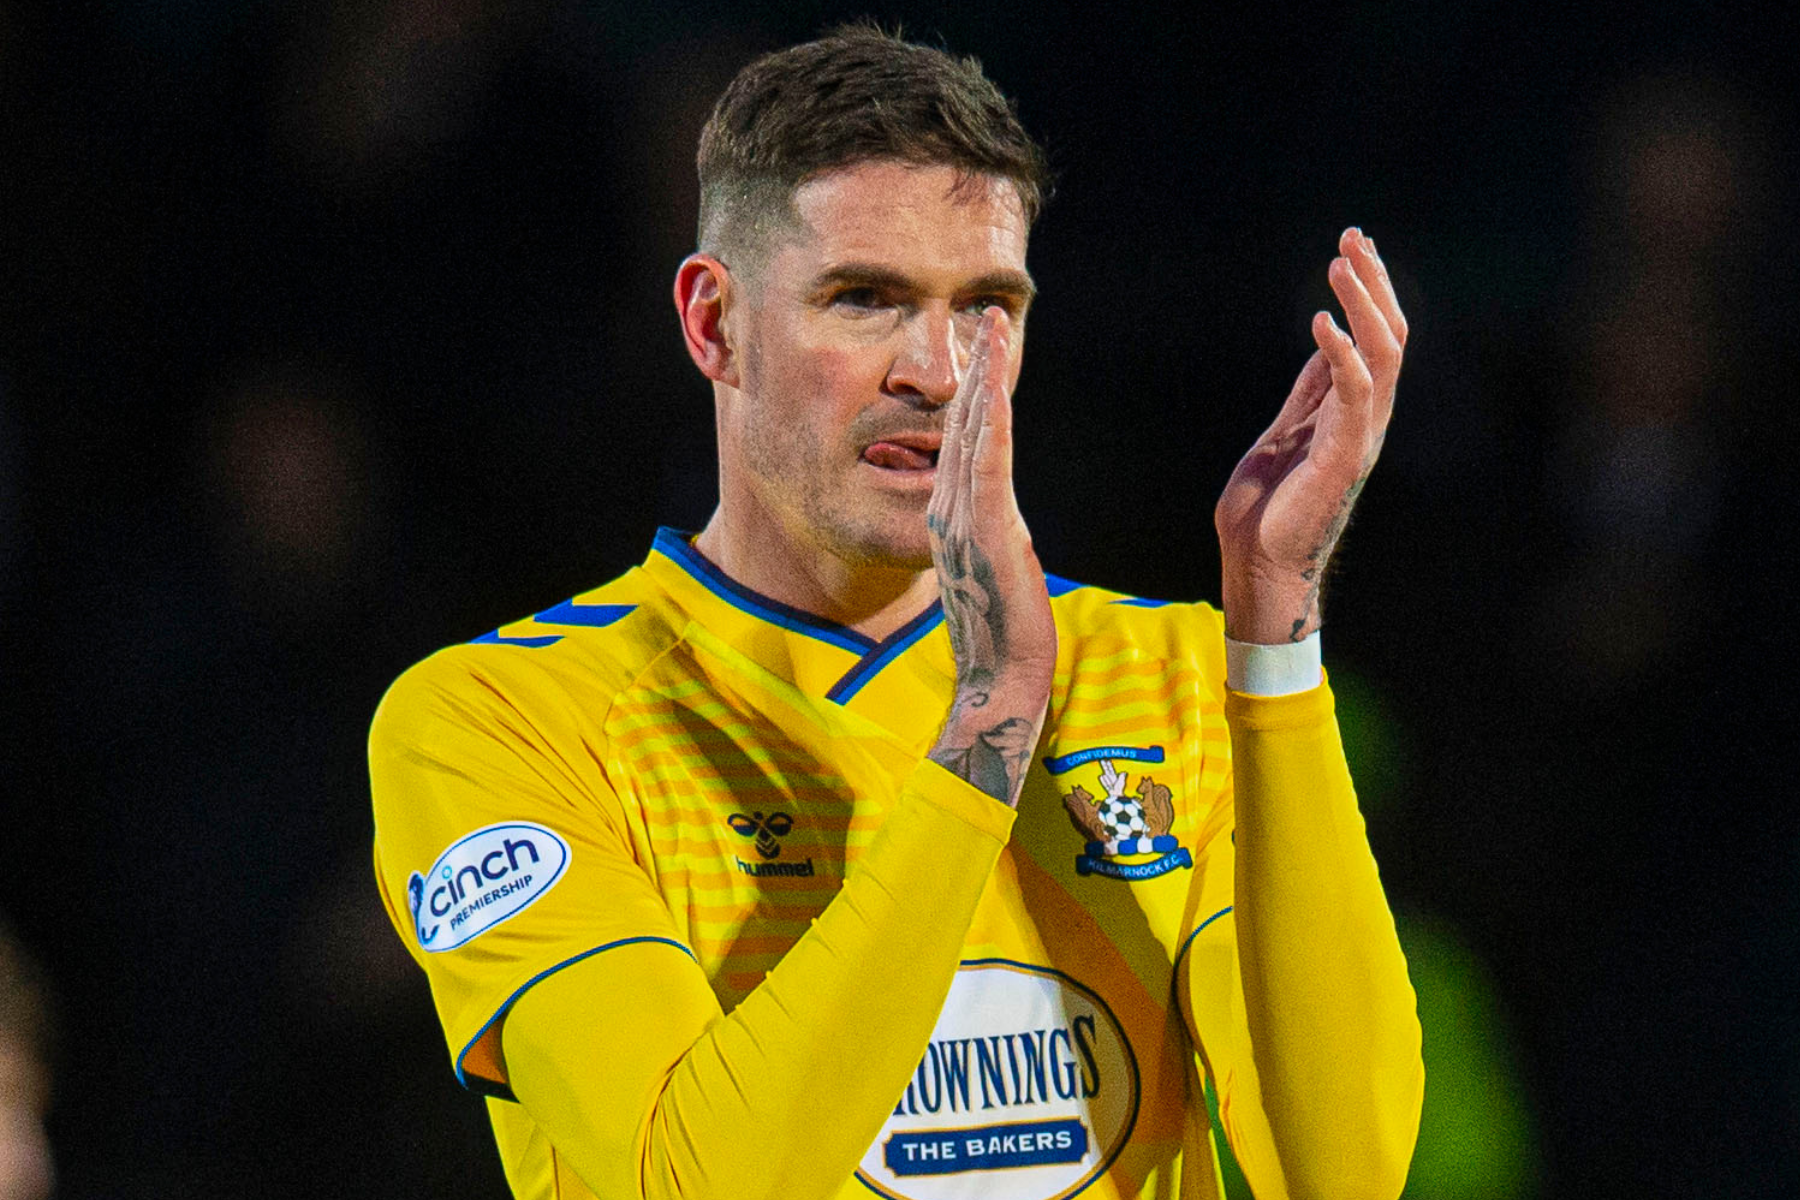 Kyle Lafferty 'obsession' has to stop, insists Derek McInnes